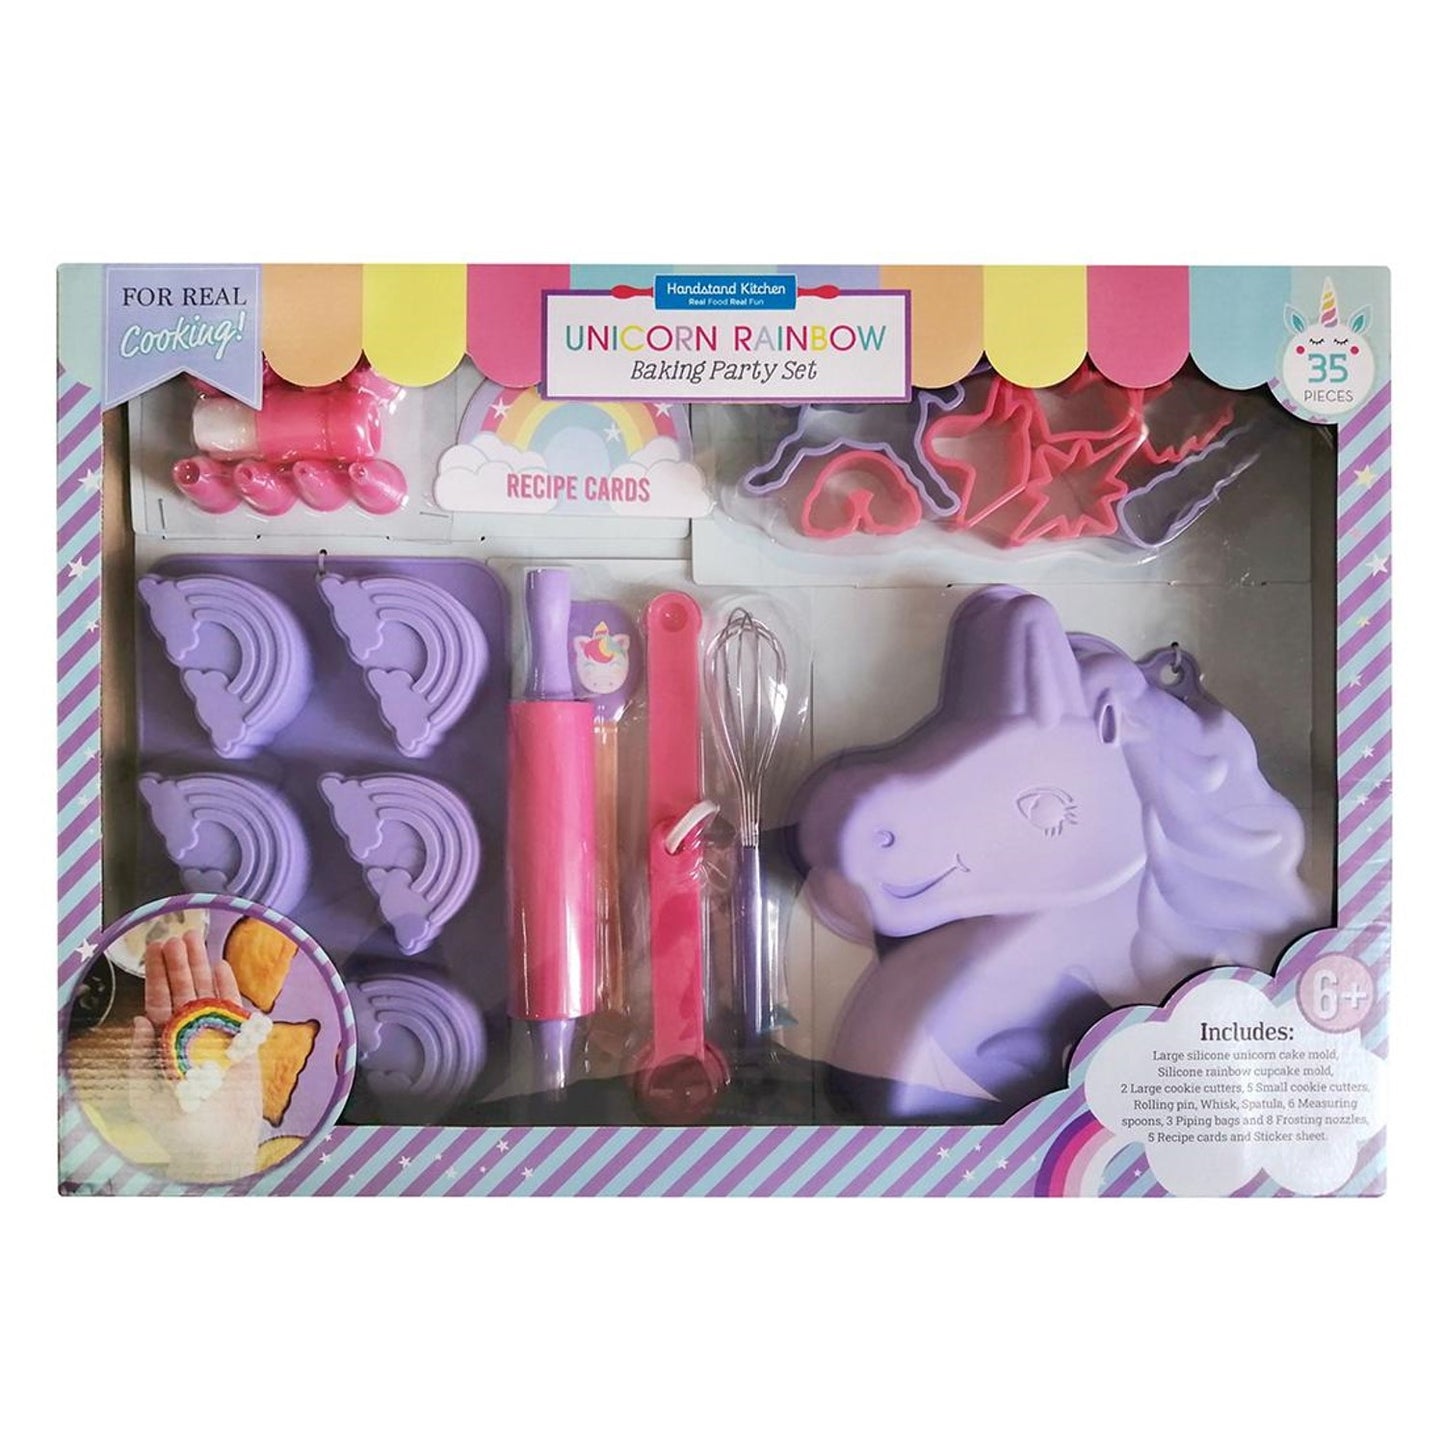 Handstand Kitchen Baking Party Set Unicorns for Real Cooking